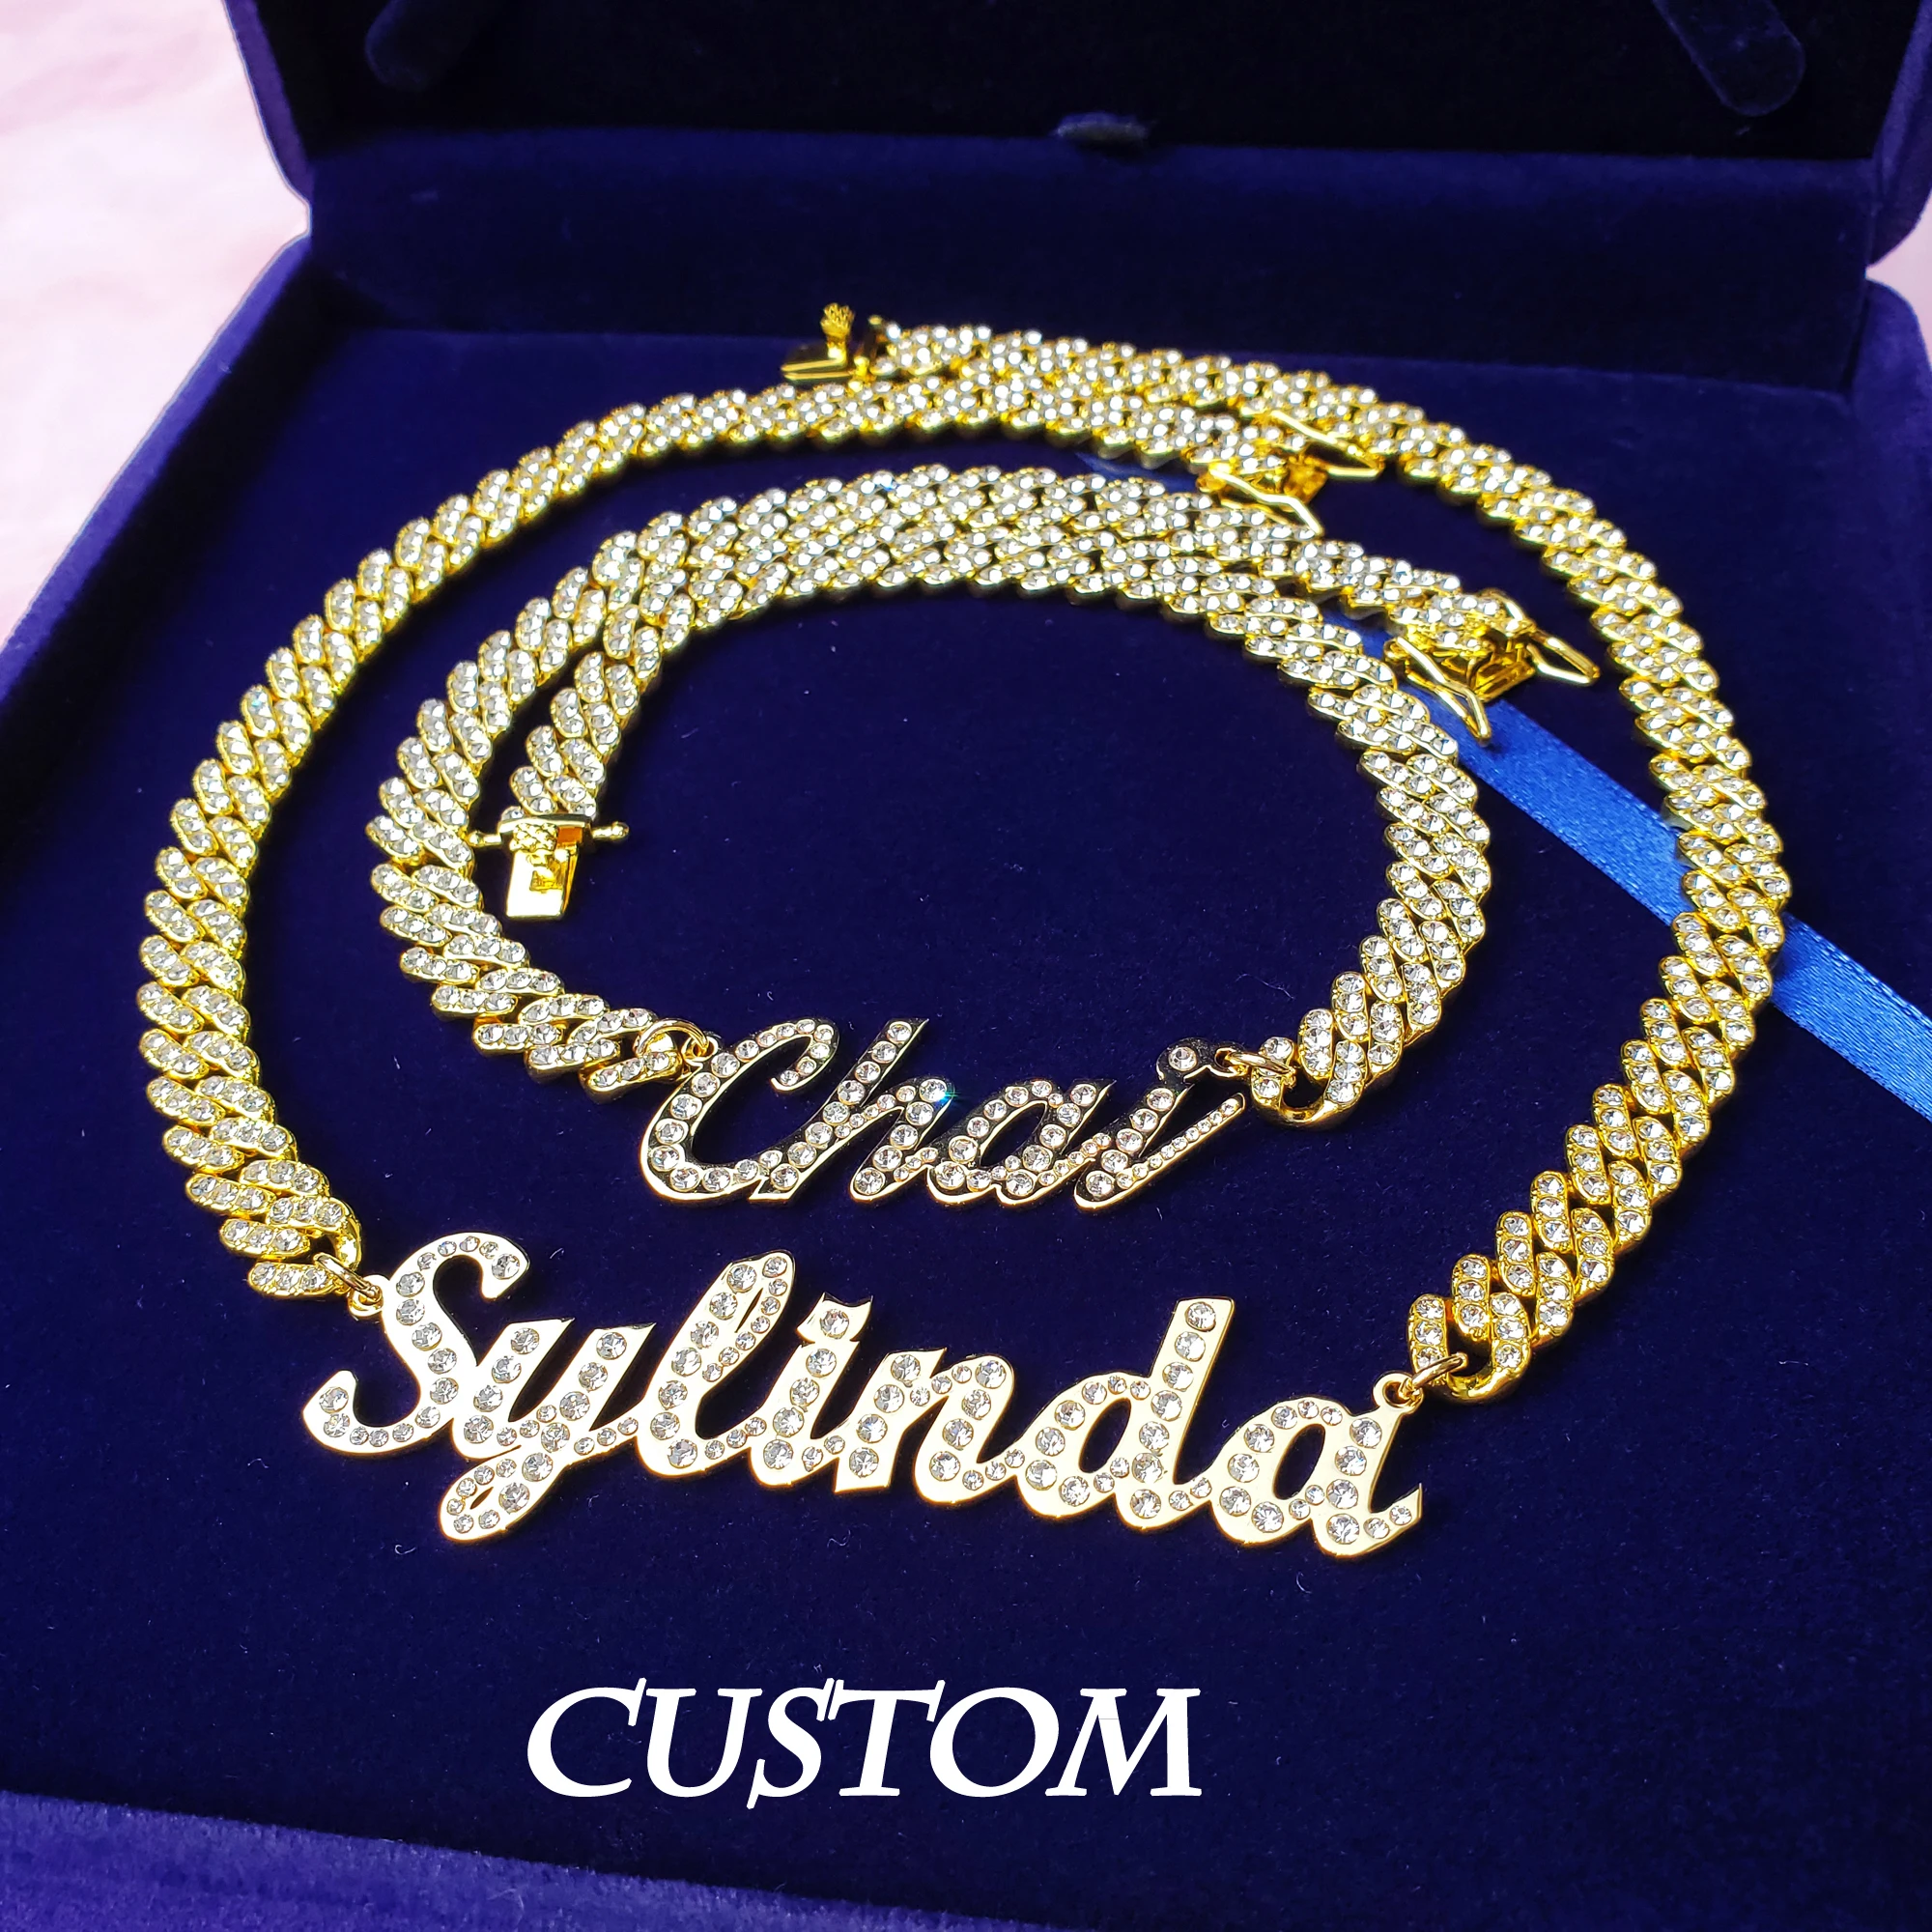 Personalized Name Necklace Stainless Steel with Rhinestone Cuban Chain Choker Necklace Perfect Gift for Her Part Prom Jewelry hollow out rhinestone decor 304 stainless steel smart watch band women slide bracelet for samsung gear s3 classic s3 frontier rose gold